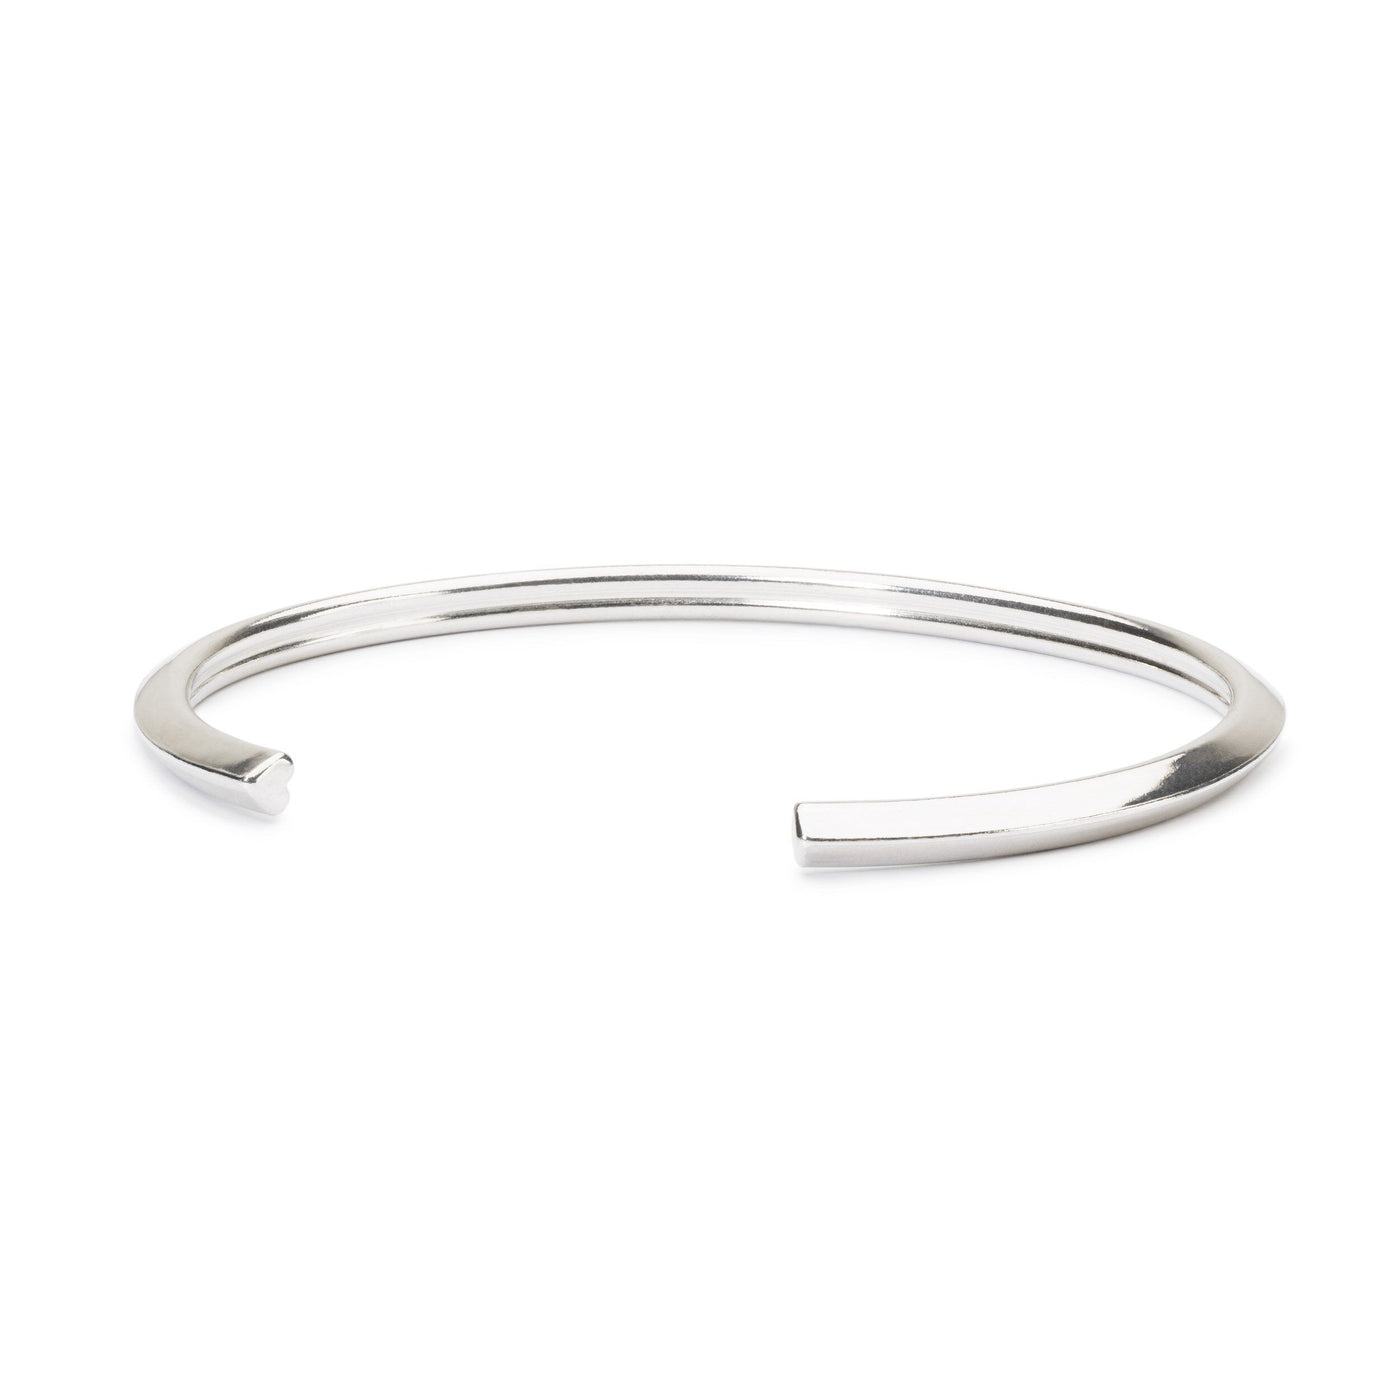 Heart Bangle with 2 x Silver Spacers - Trollbeads Canada